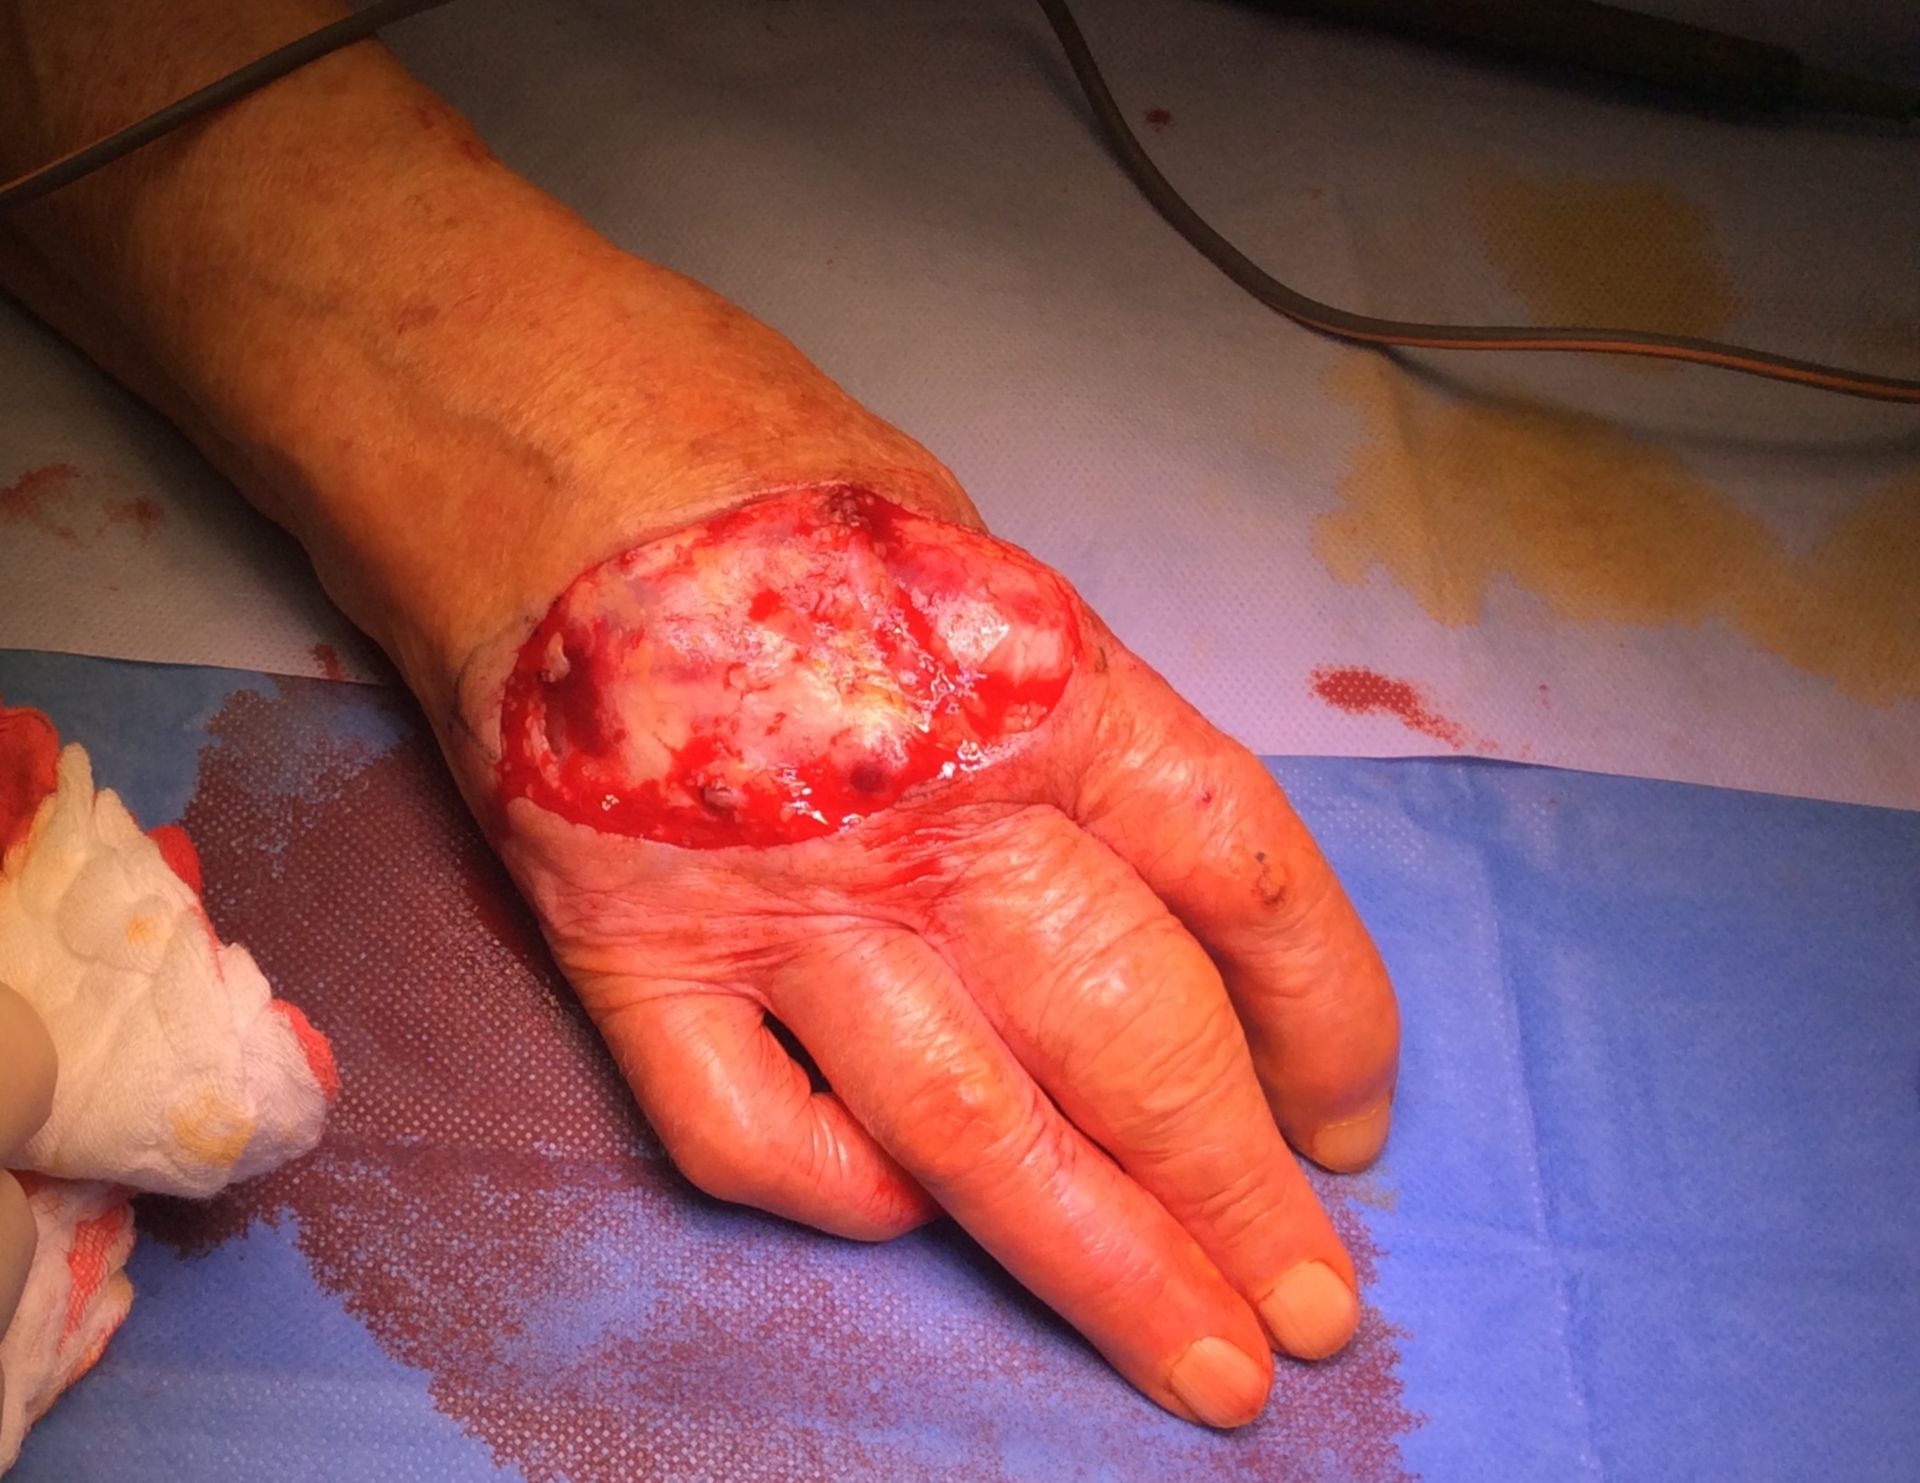 Squamous cell carcinoma of the hand - situs after resection